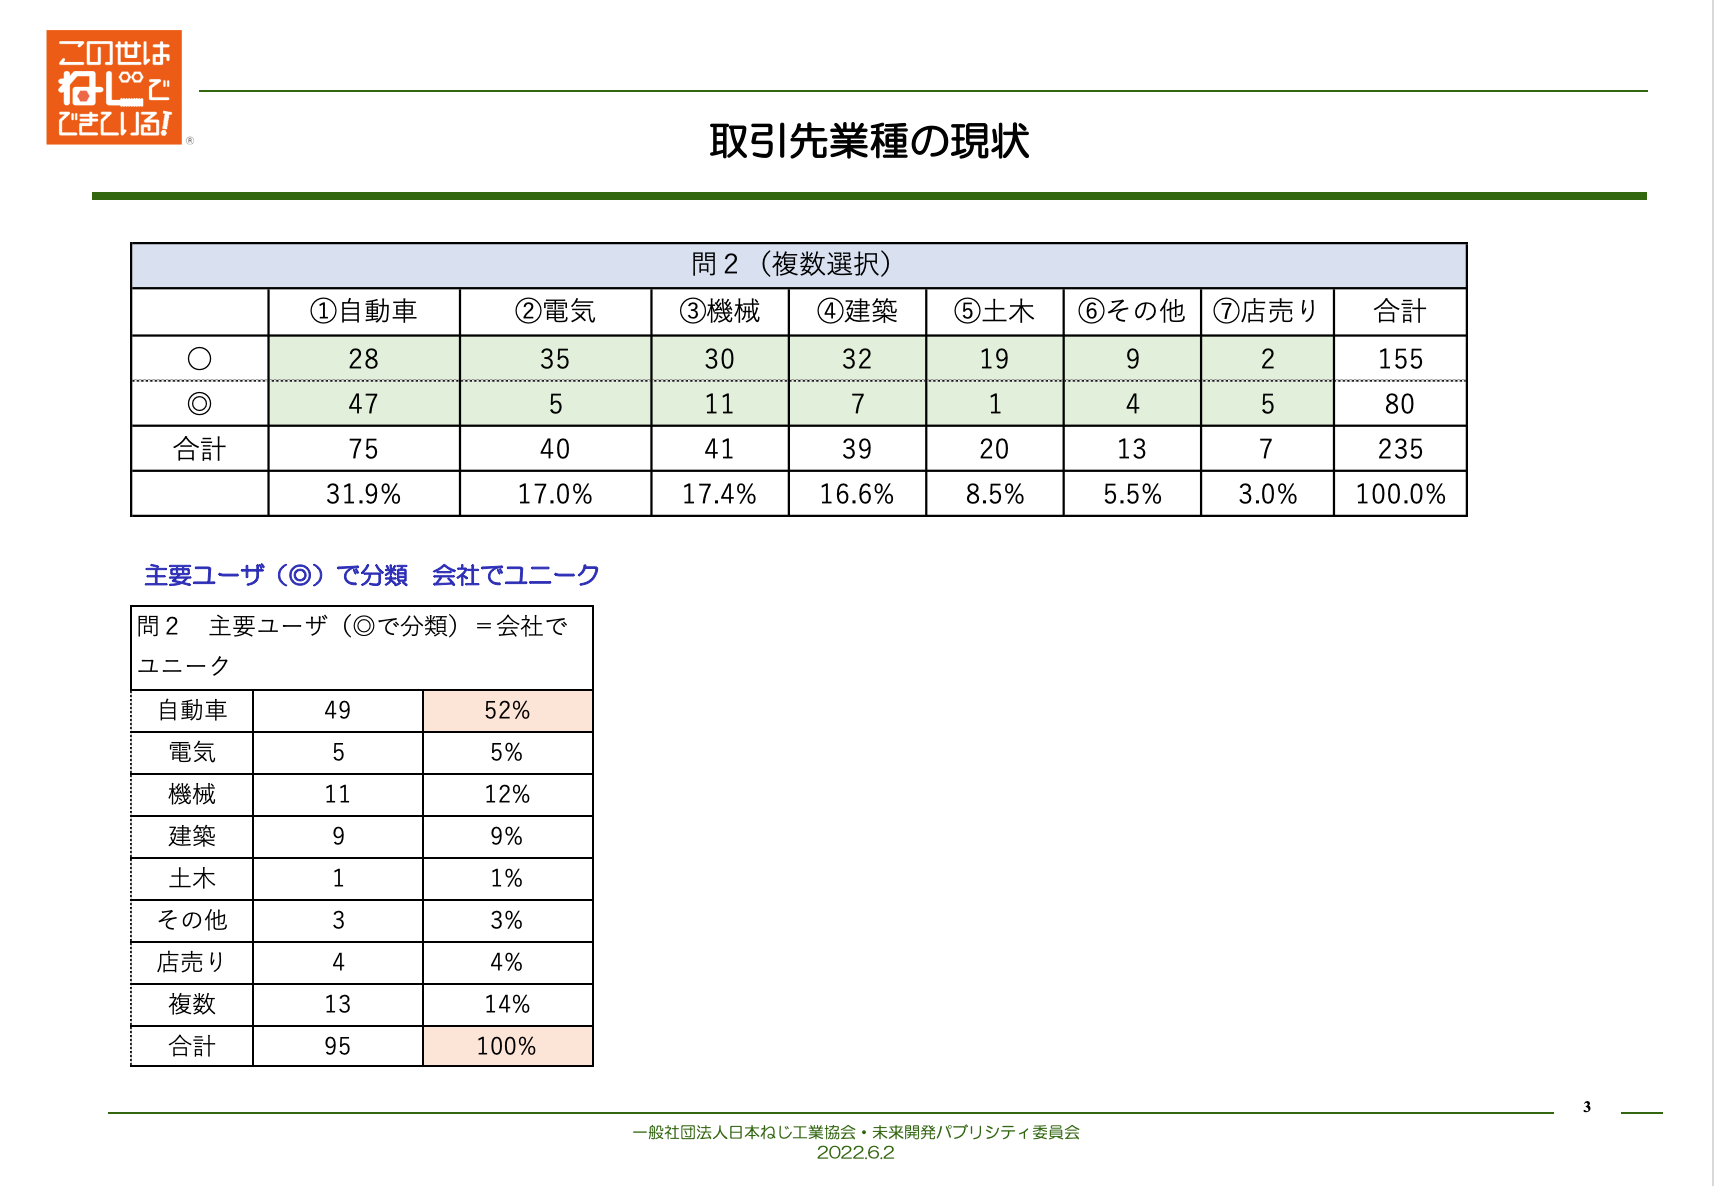 ３：Survey analysis results 2022-06-10 11.28.30.png